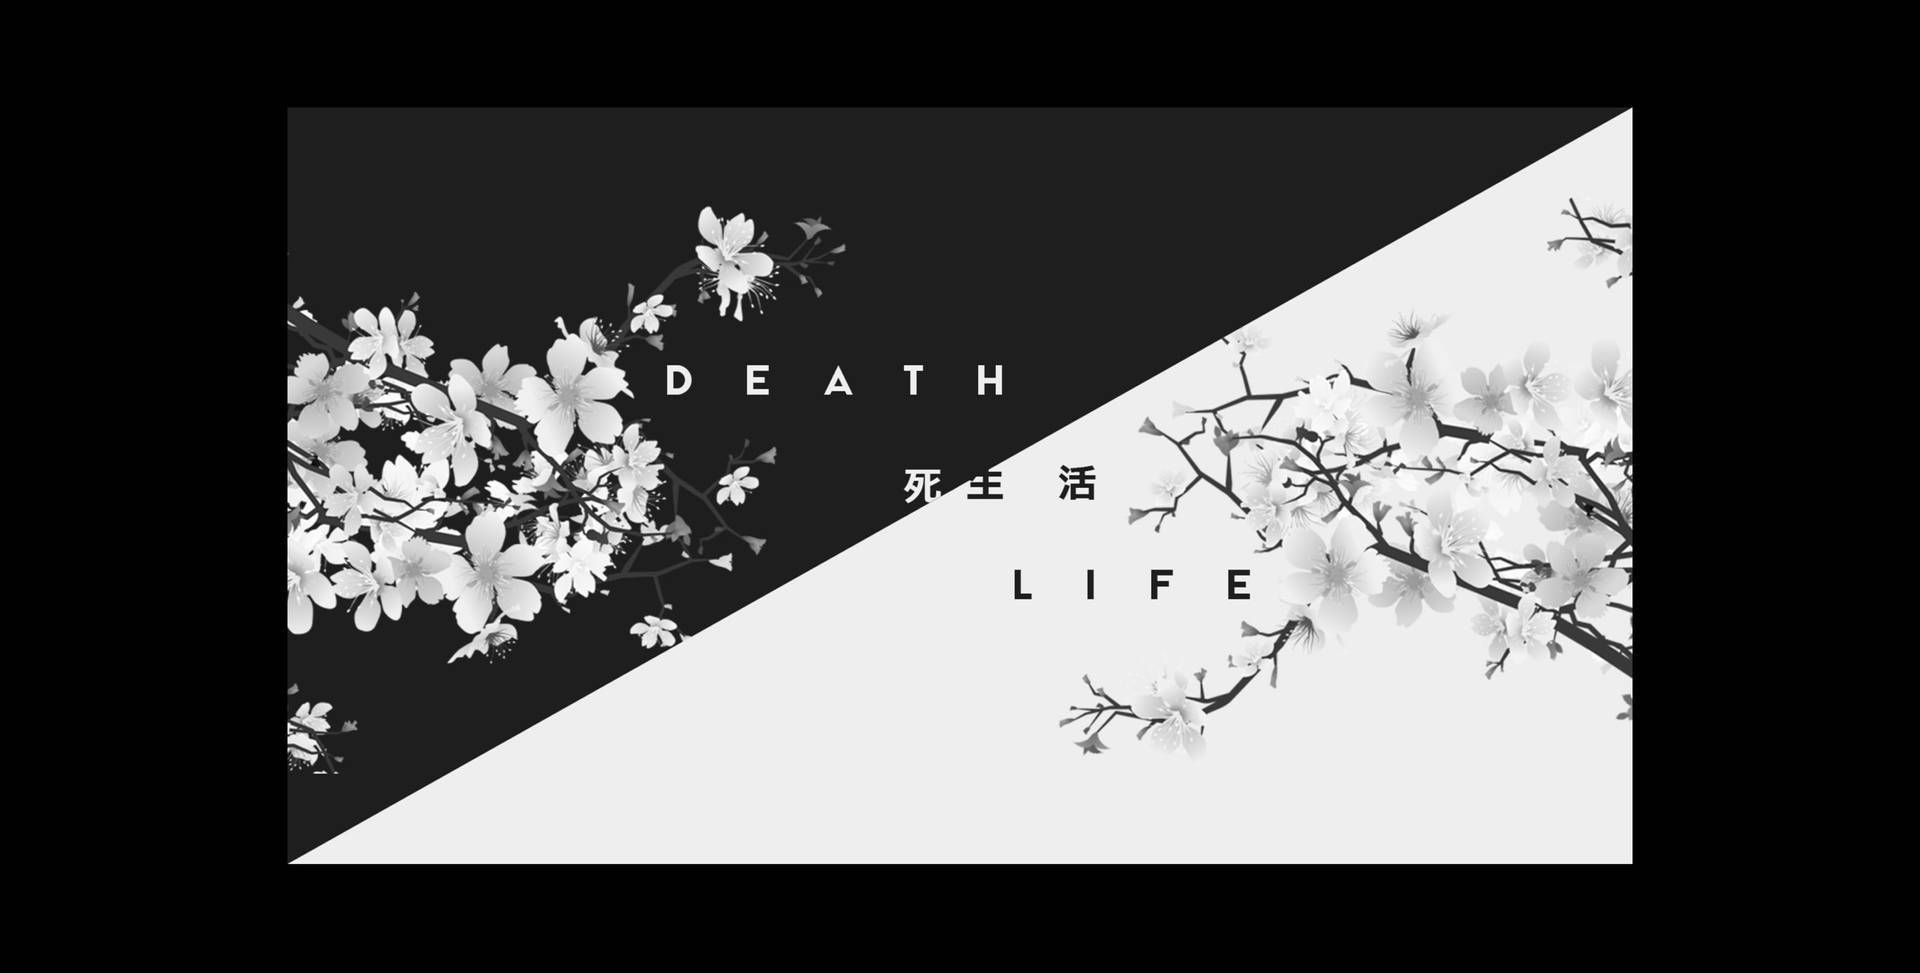 Share 79+ life and death wallpaper 4k latest - in.cdgdbentre